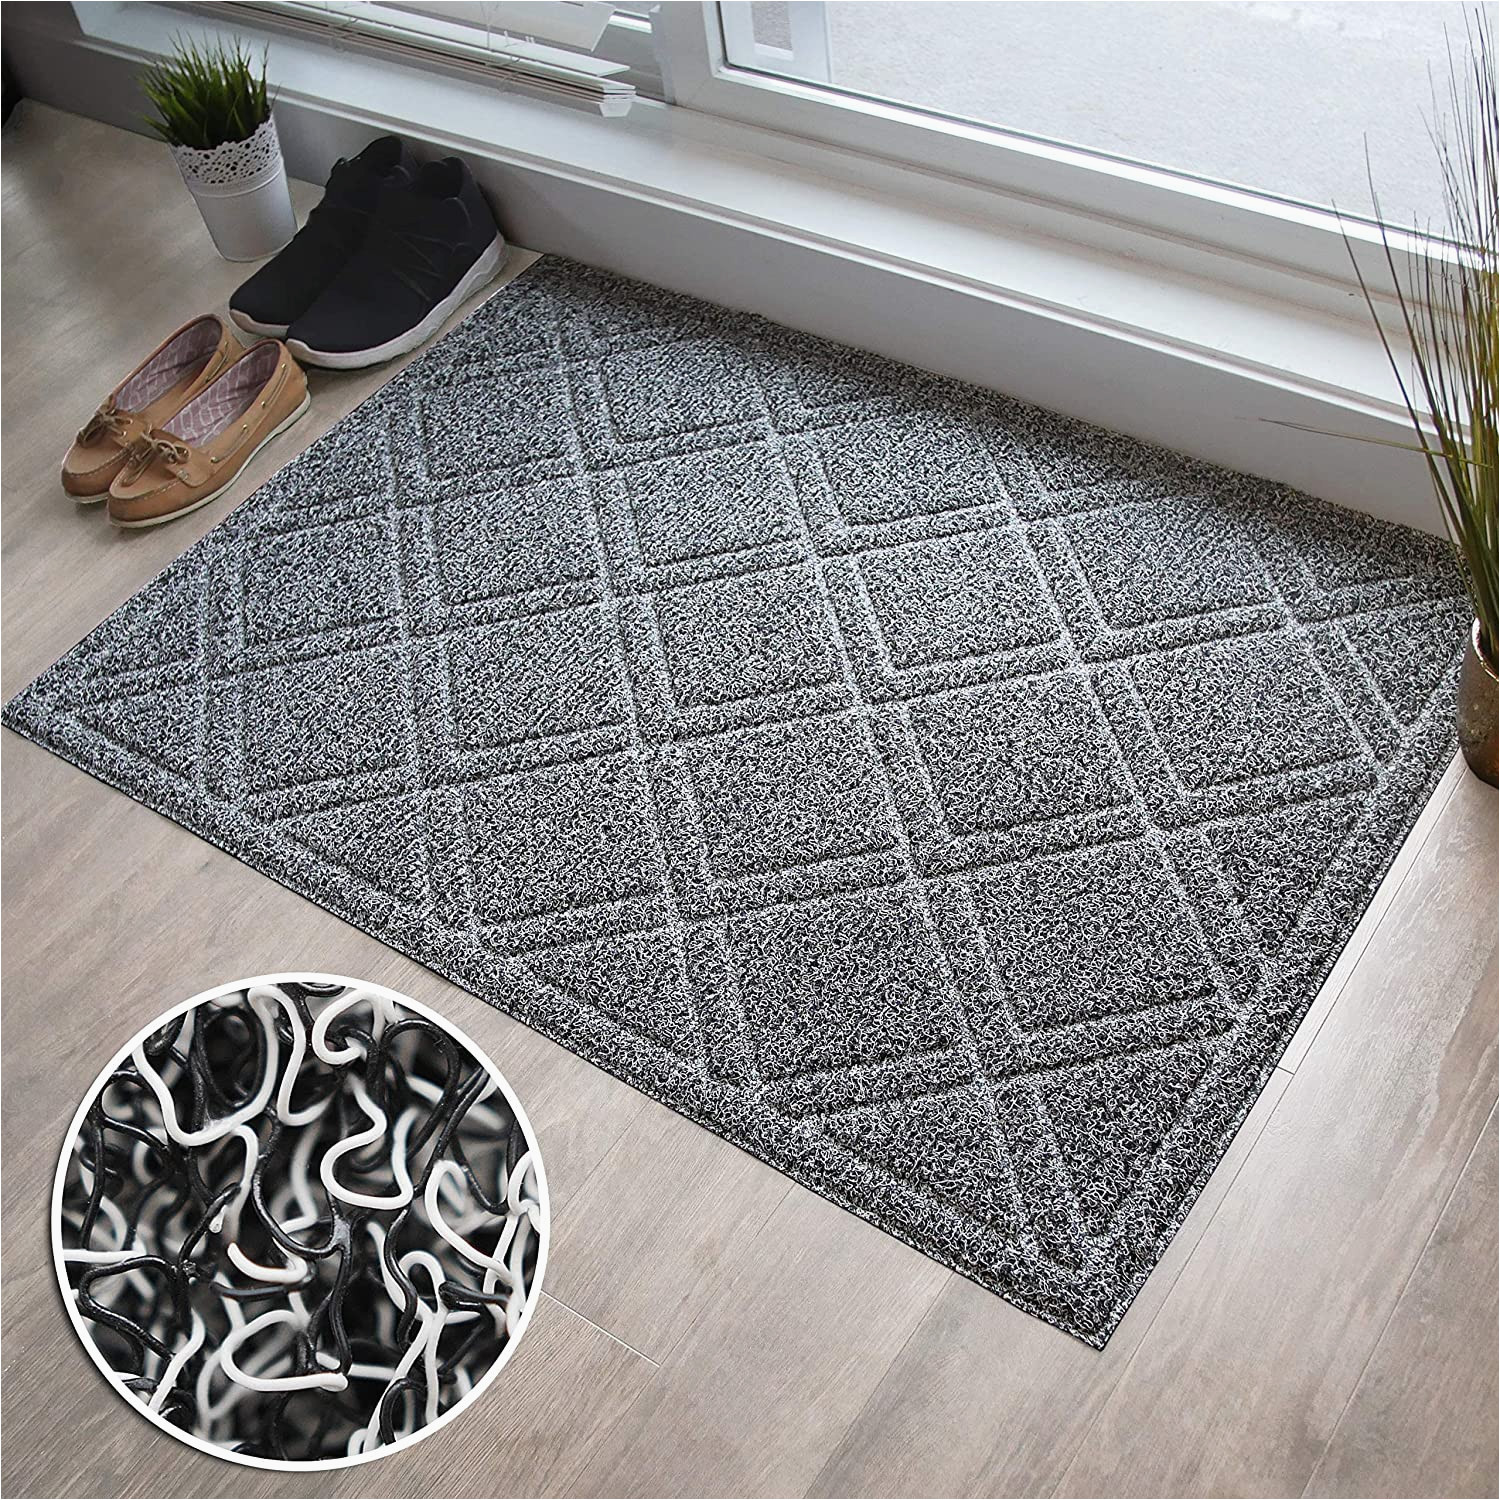 Extra Large Indoor Outdoor area Rugs Brighaus Large Indoor Outdoor Non Slip Heavy Duty Front Door Mat for Outdoor Patio Indoor Entrance Dirty Snow Mud Mud – Black/white, Modern